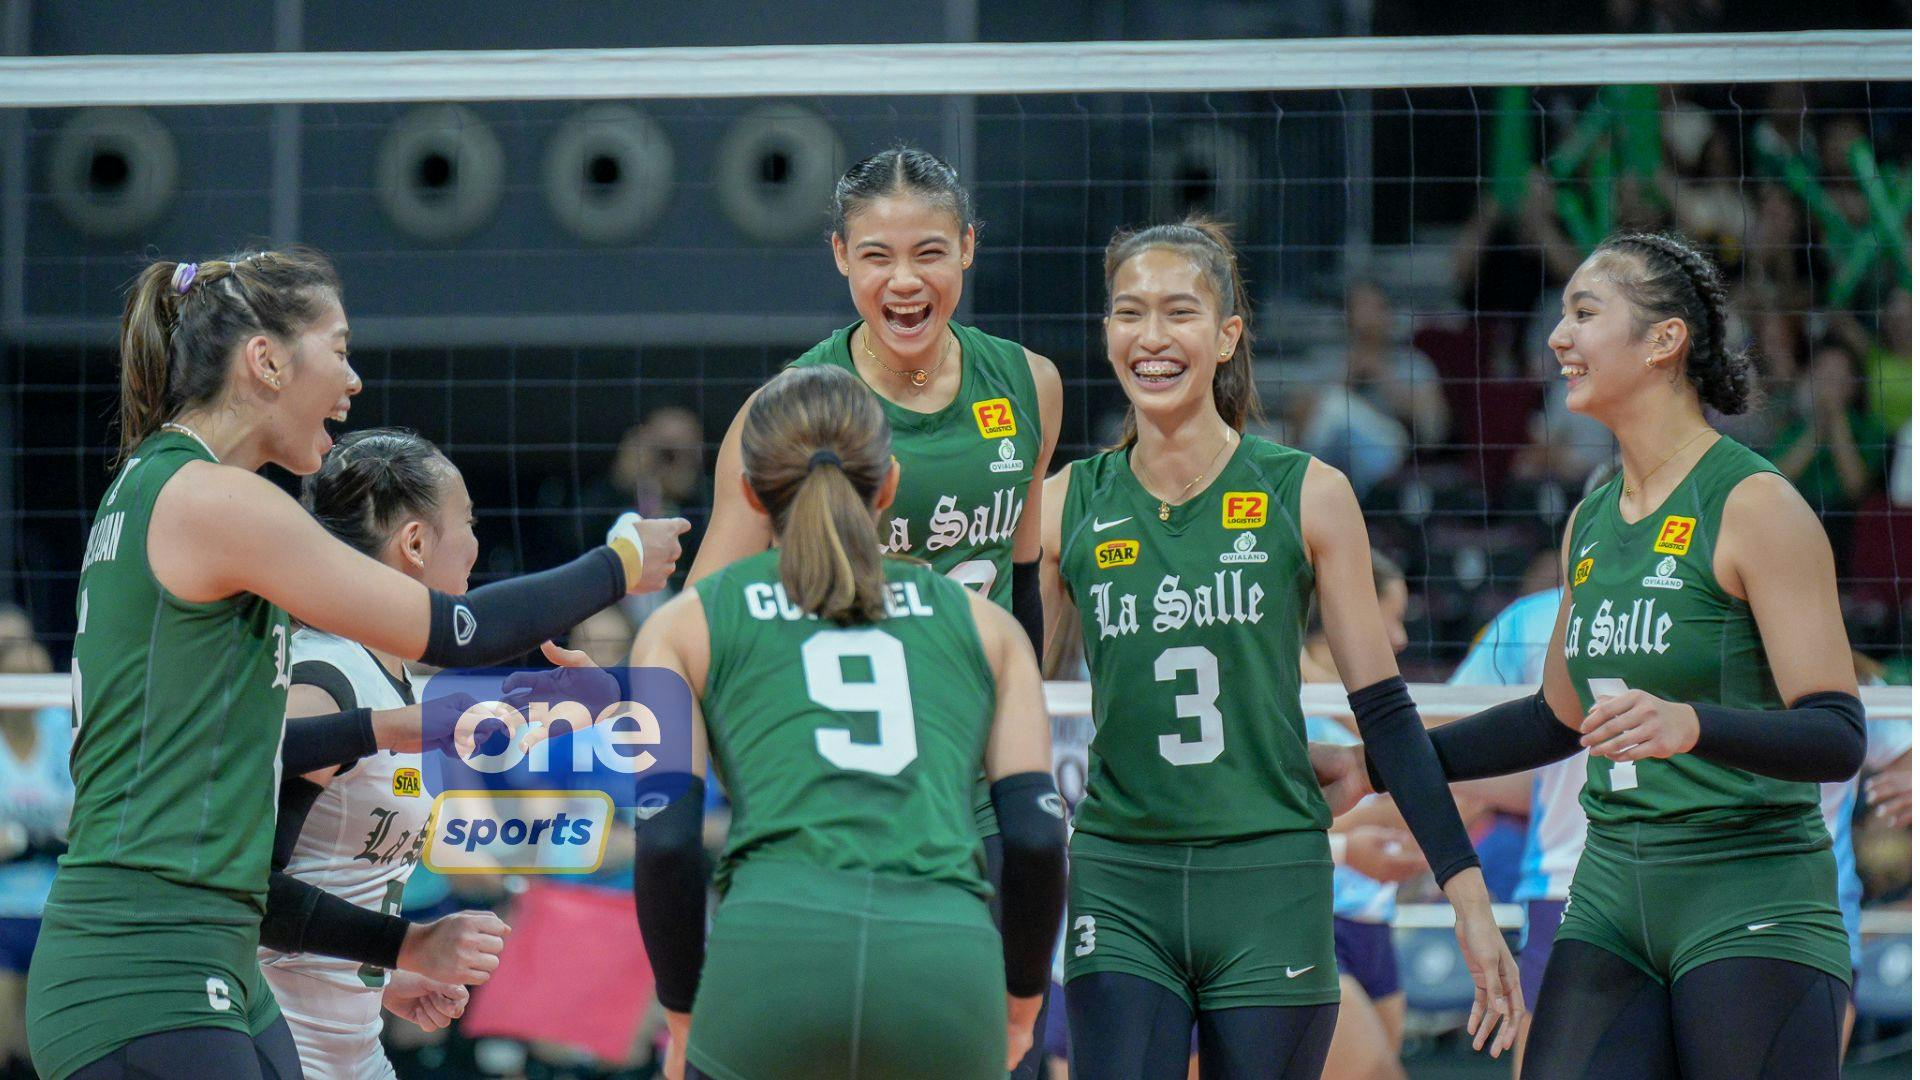 UAAP: Reigning champion La Salle shows might, demolishes Adamson on opening day